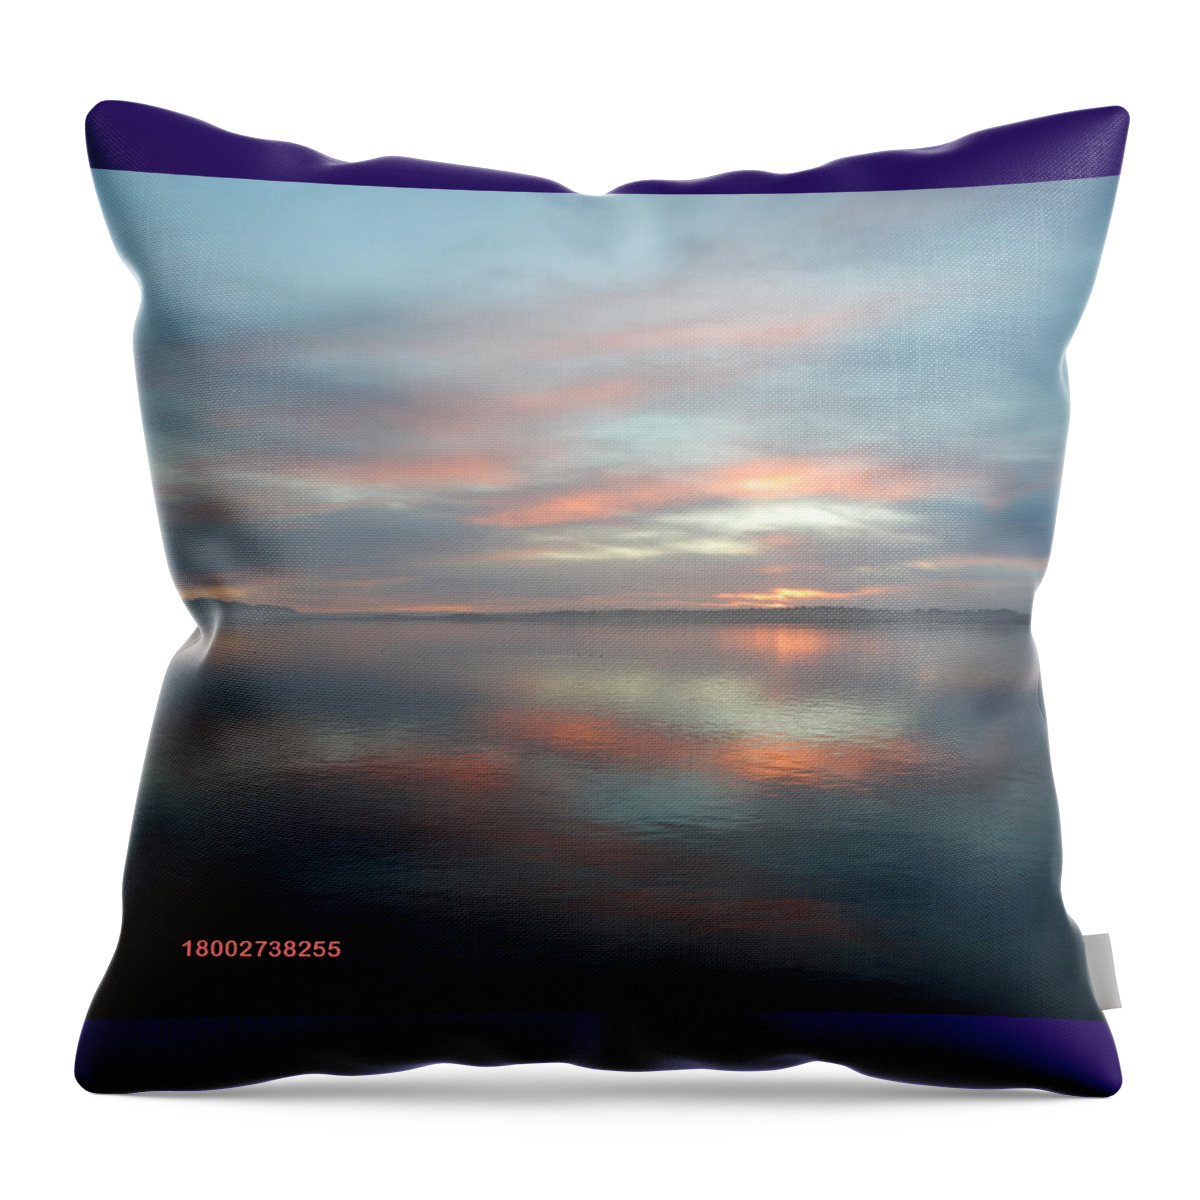 Galleryofhope Throw Pillow featuring the photograph Striped Sunset With Lifeline # by Gallery Of Hope 